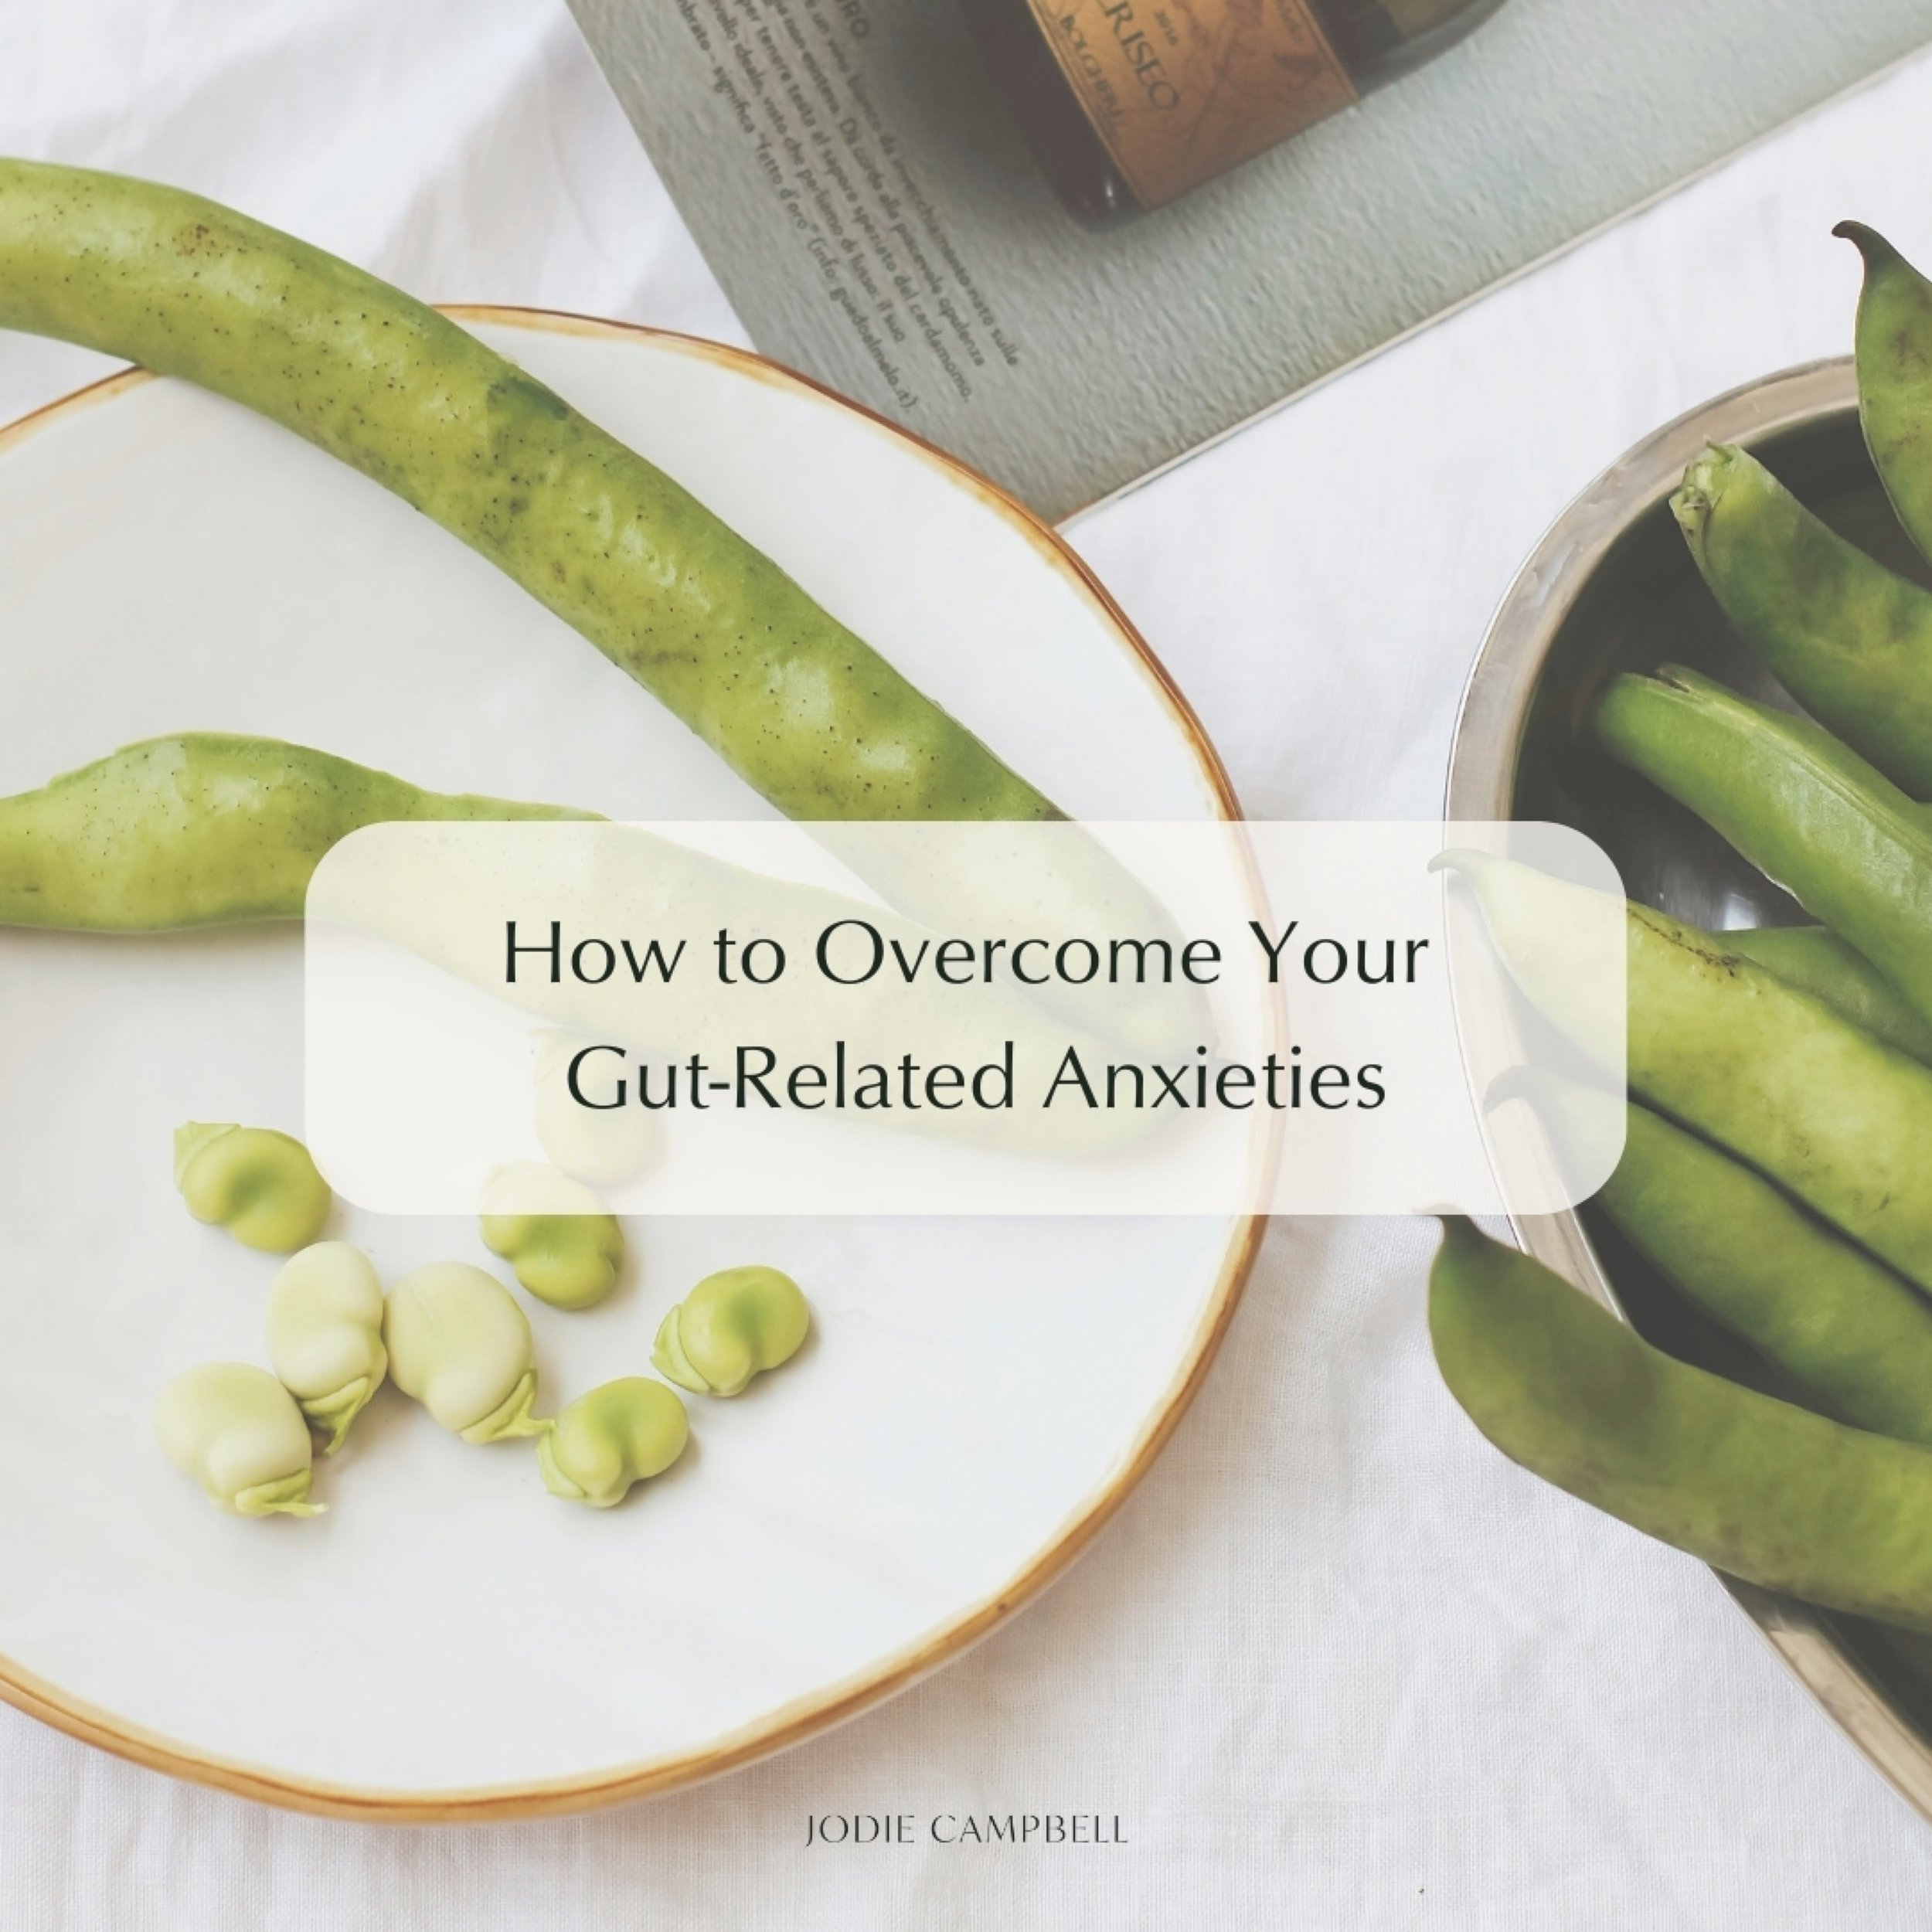 Have you heard the news?

Your gut health fears are impacting your overall well-being and quality of life. 

These fears can manifest as anxiety, stress, or even avoidance of certain foods or situations.

Is this how you want to continuing living you